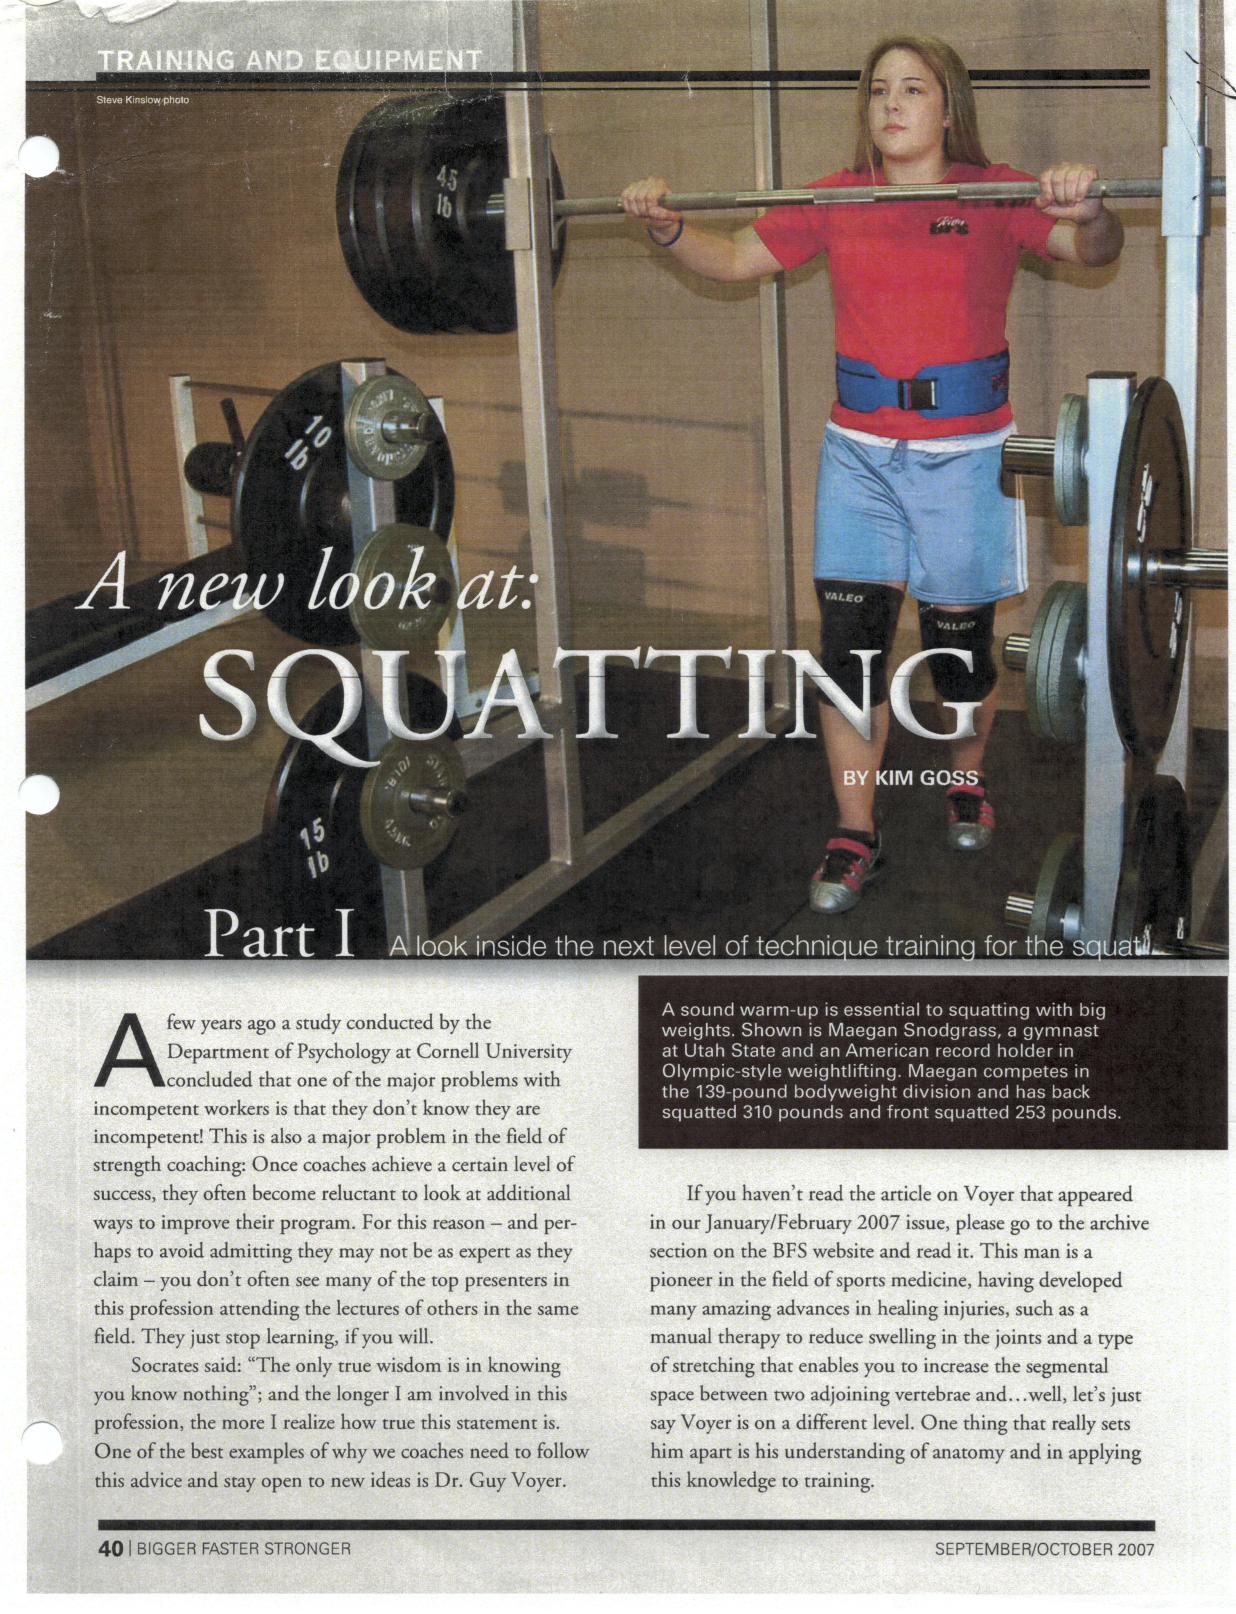 A New Look at Squatting